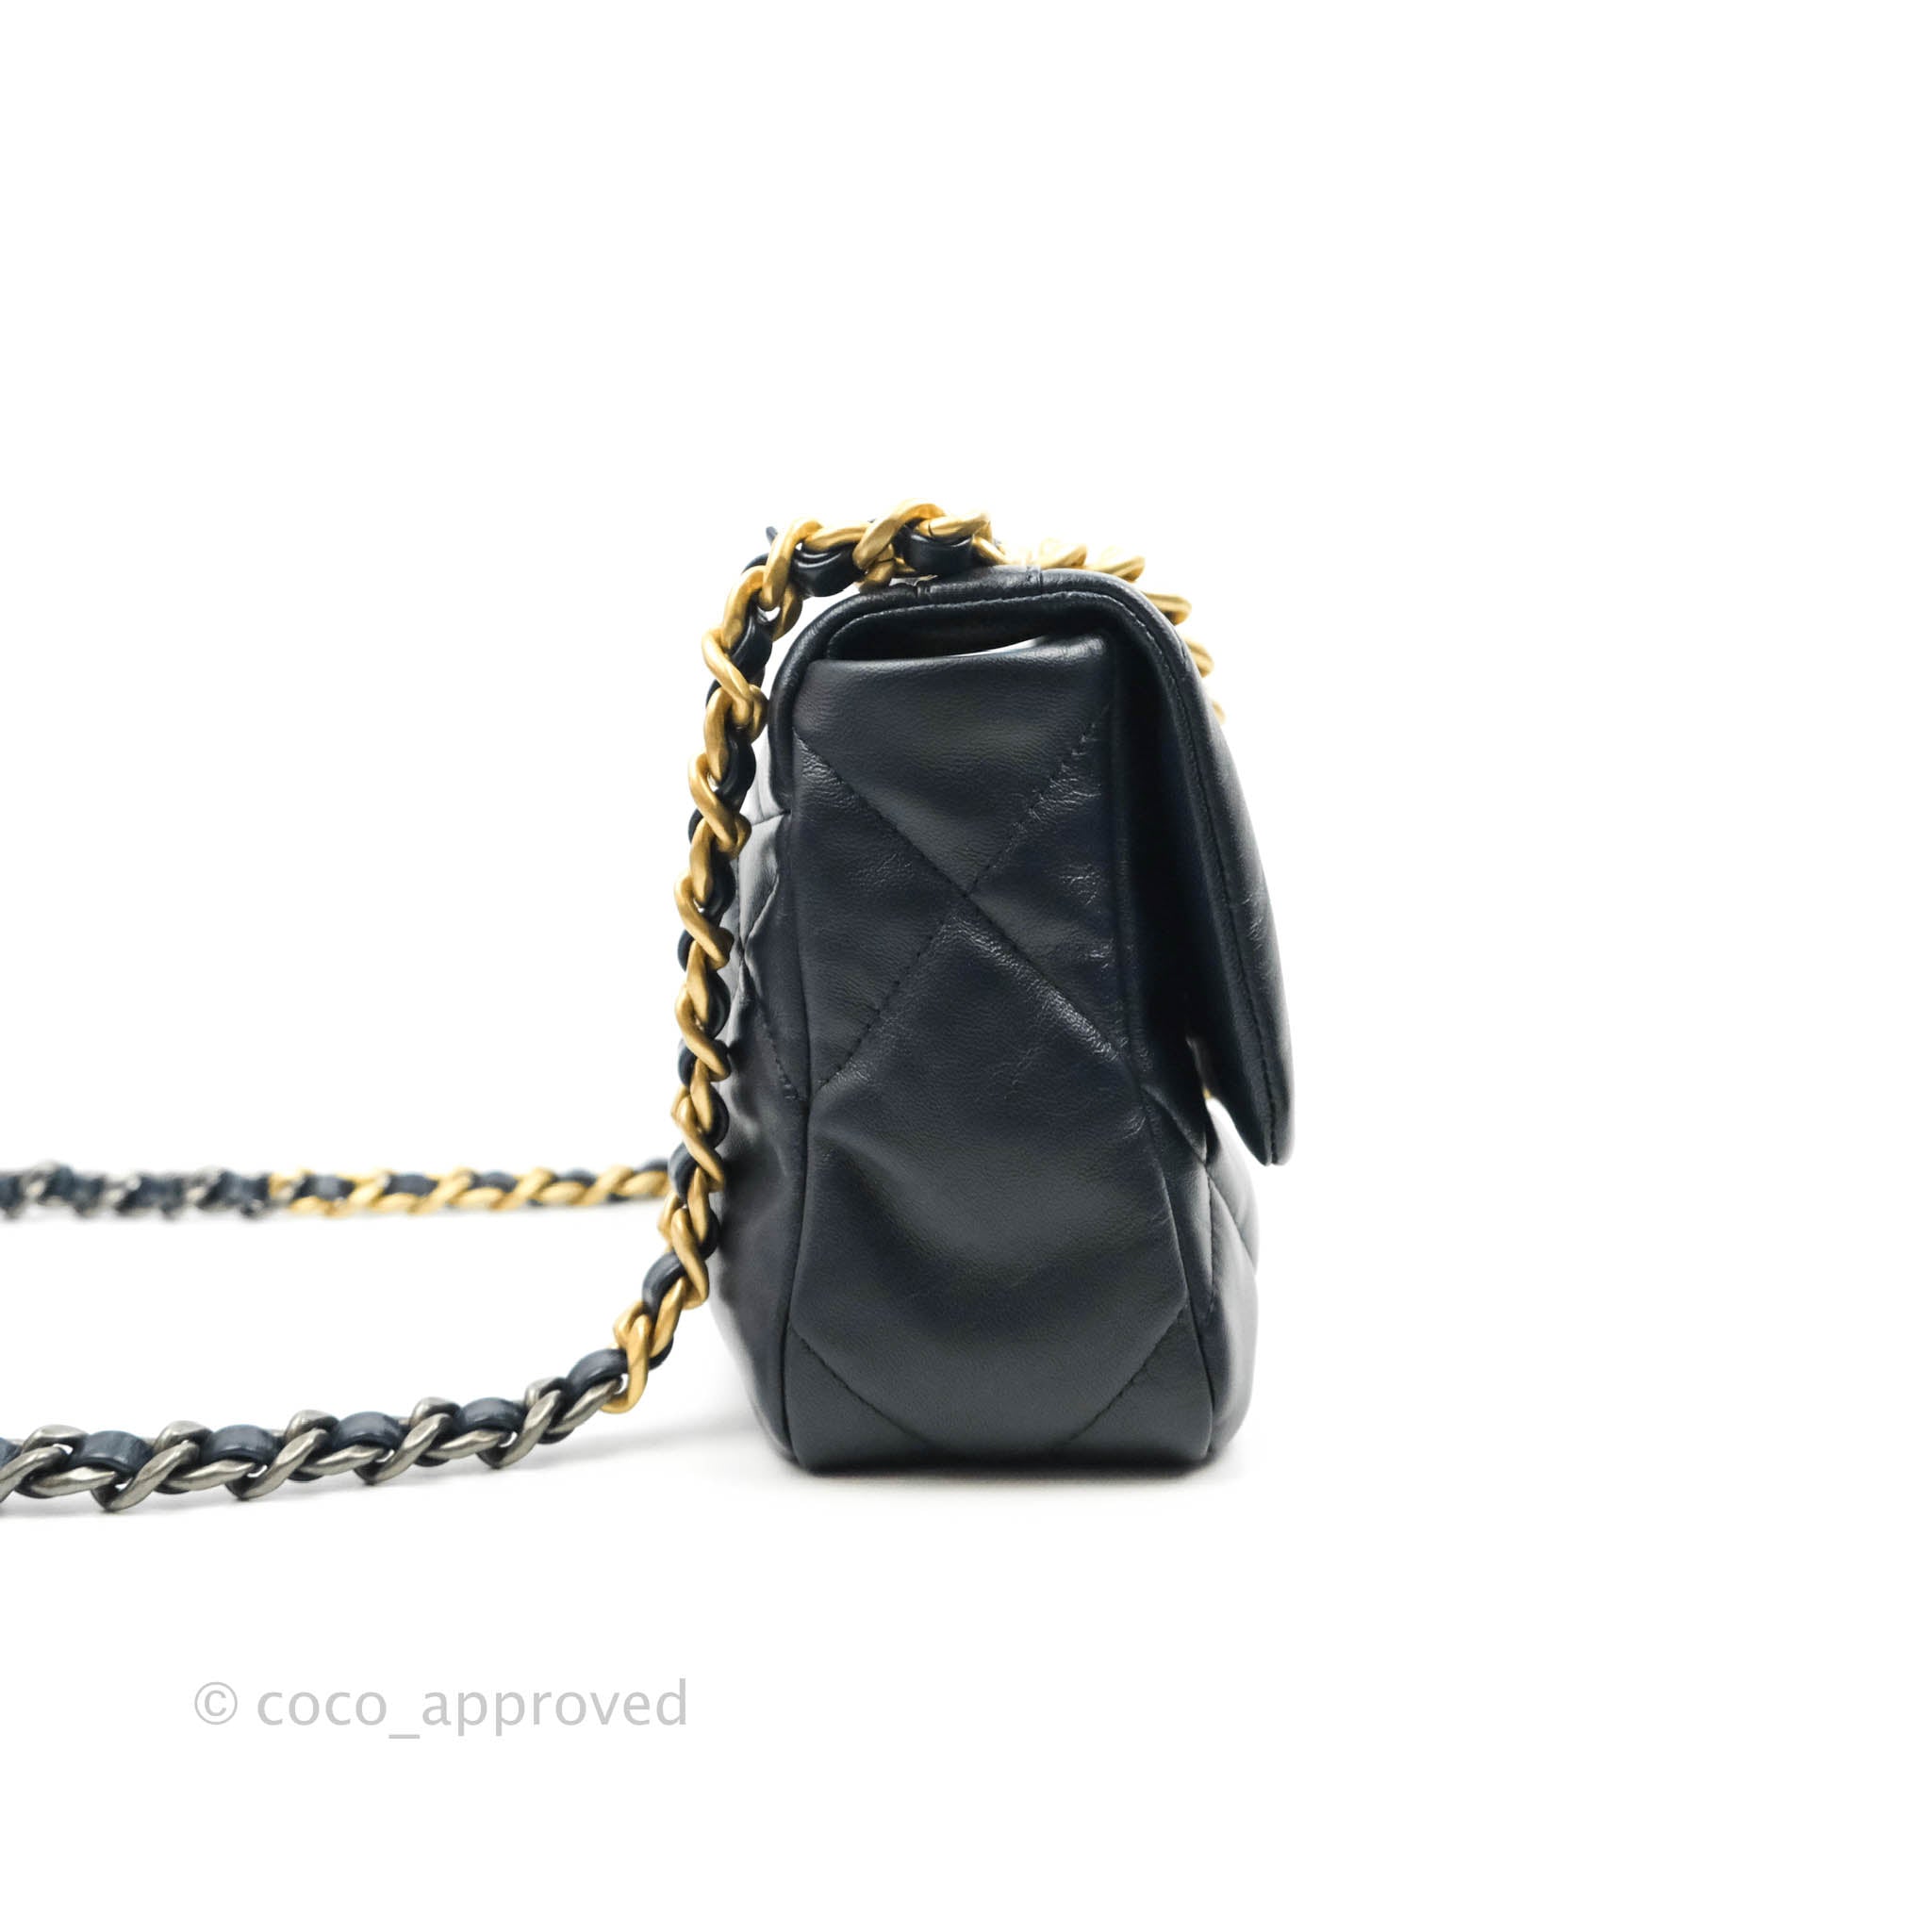 C19 Small Shoulder Bag in Lambskin, Mixed Hardware